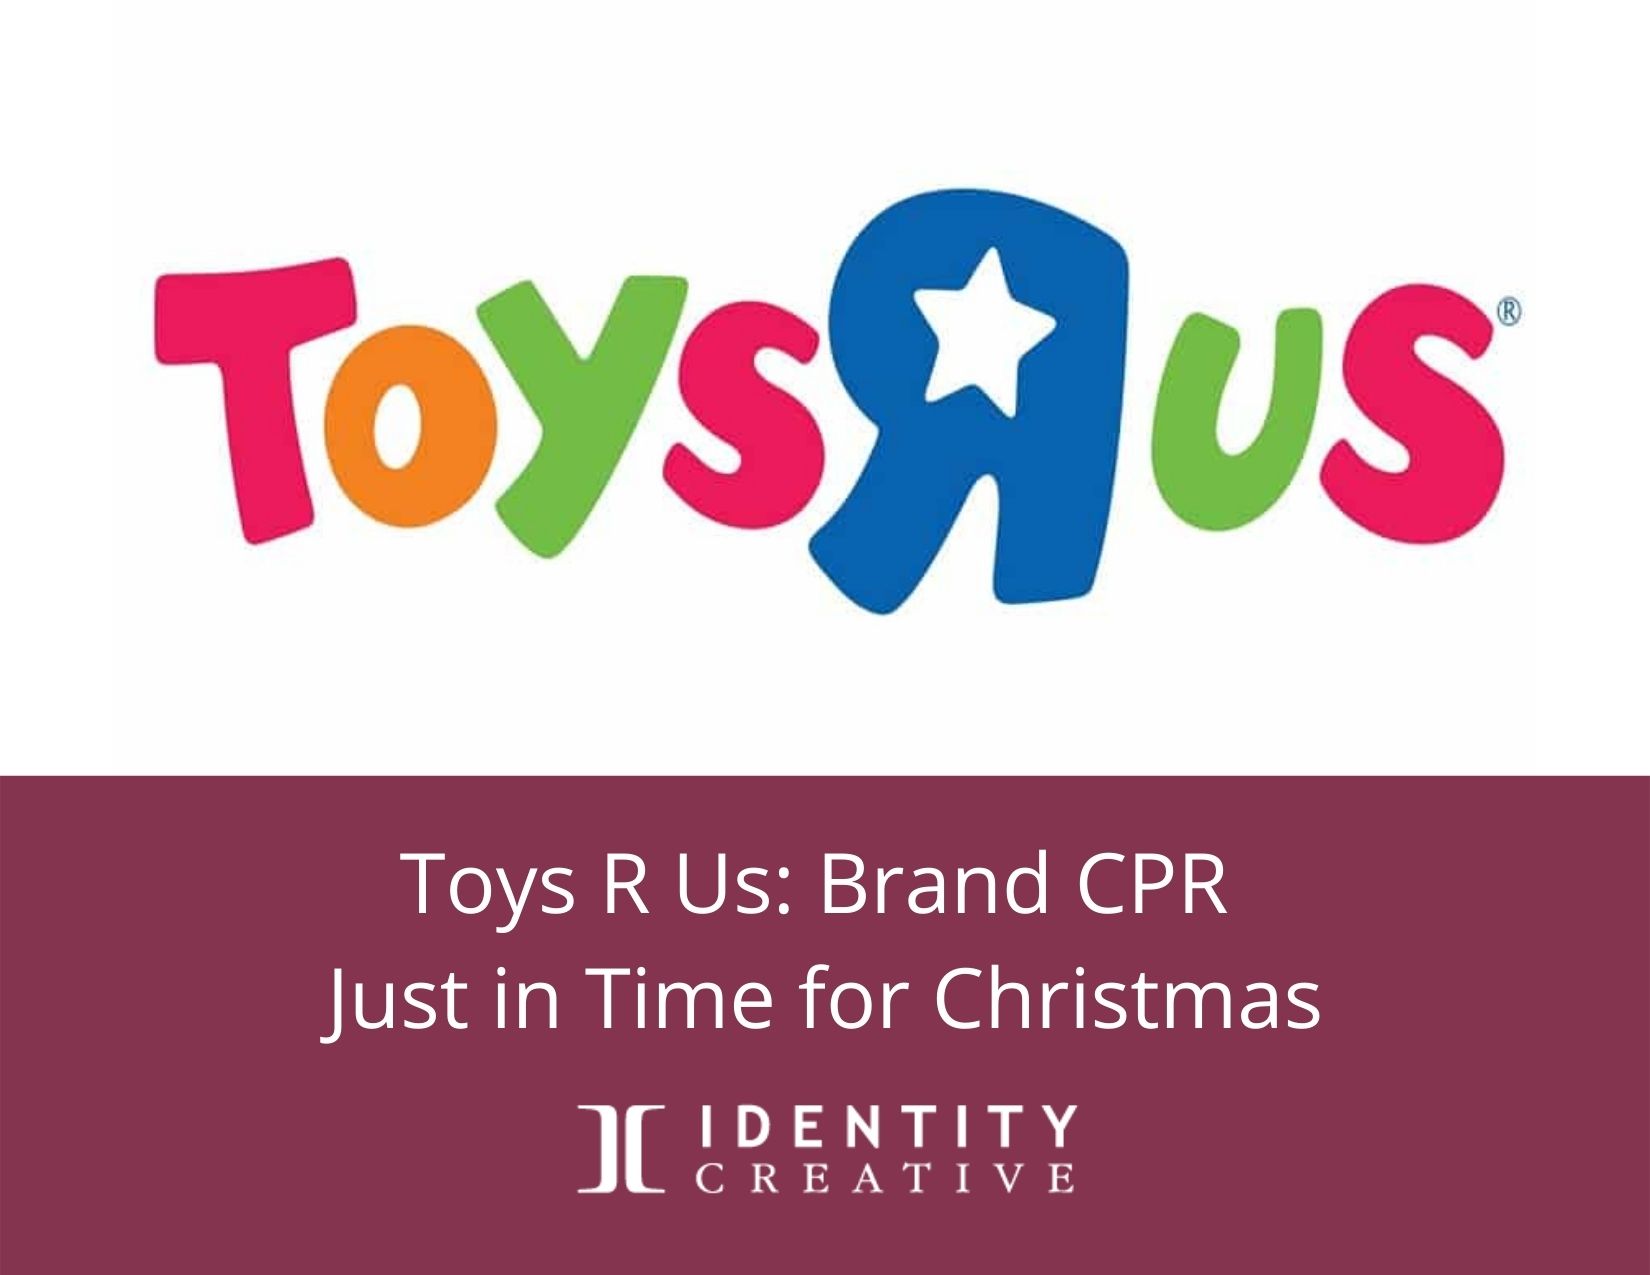 toys-r-us-brand-cpr-just-in-time-for-christmas-identity-creative